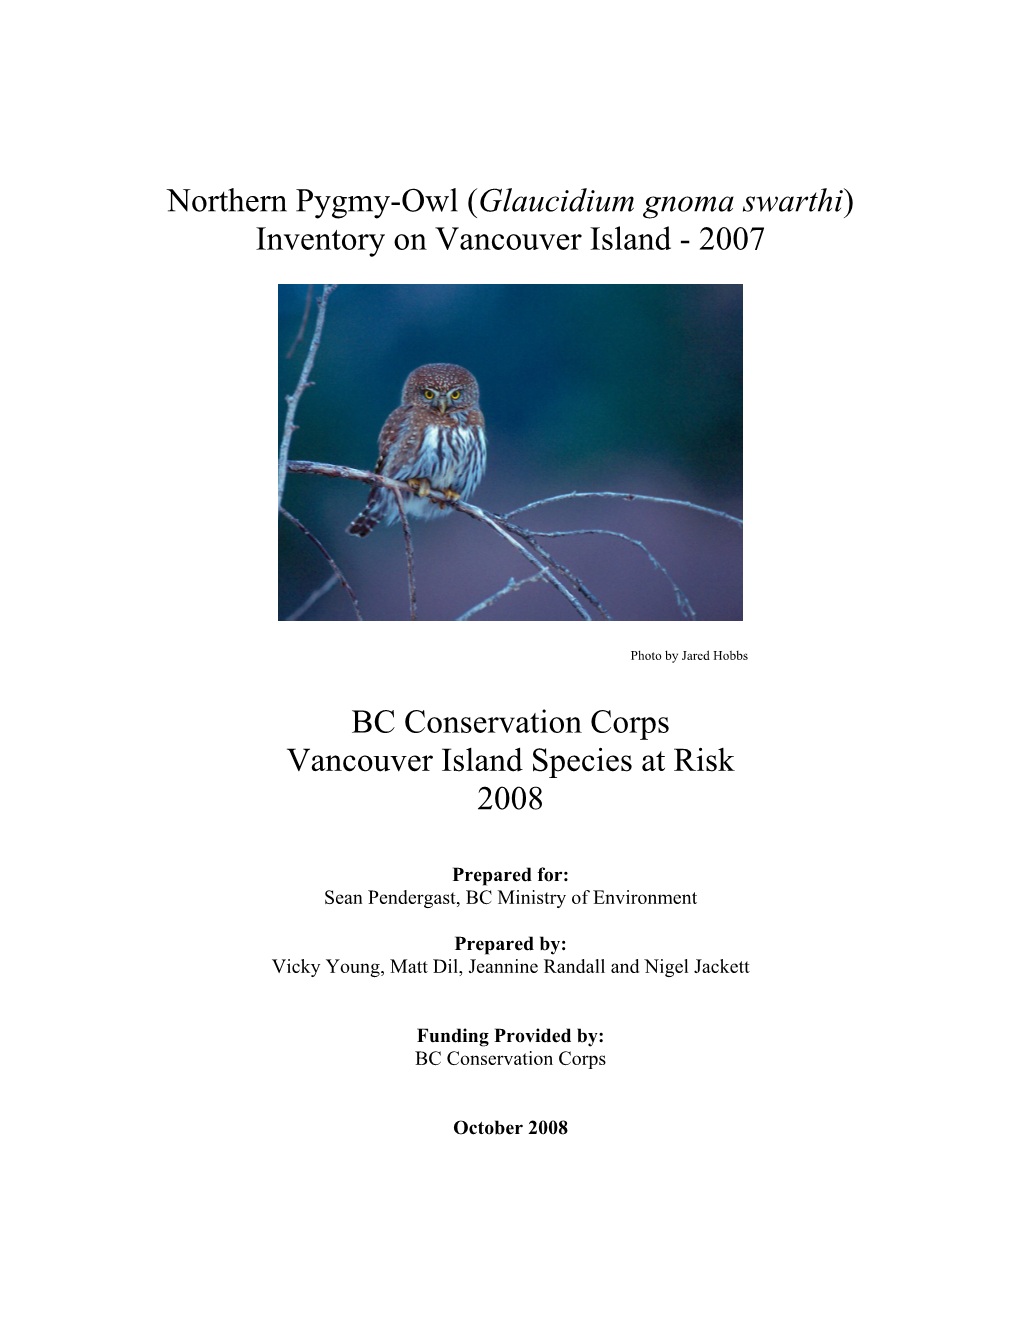 Project Completion Report for the 2007 Northern Pygmy-Owl